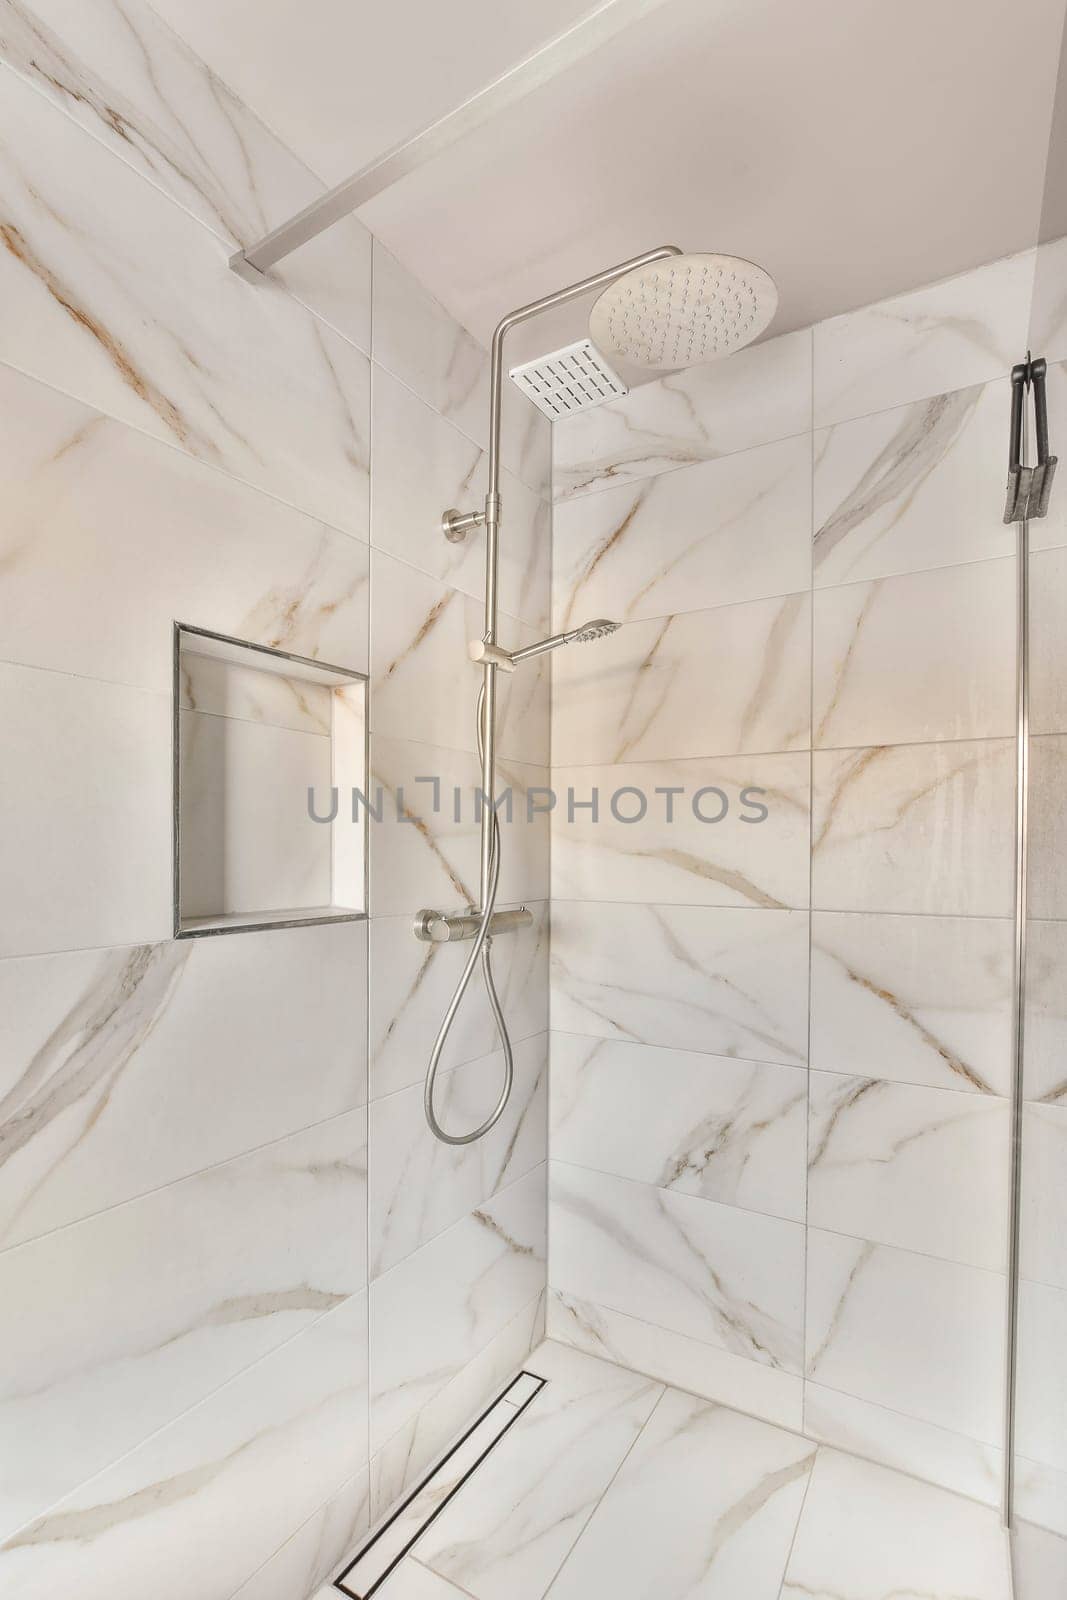 a bathroom with marble walls and white tiles on the shower wall, there is an overhead shower head in the corner